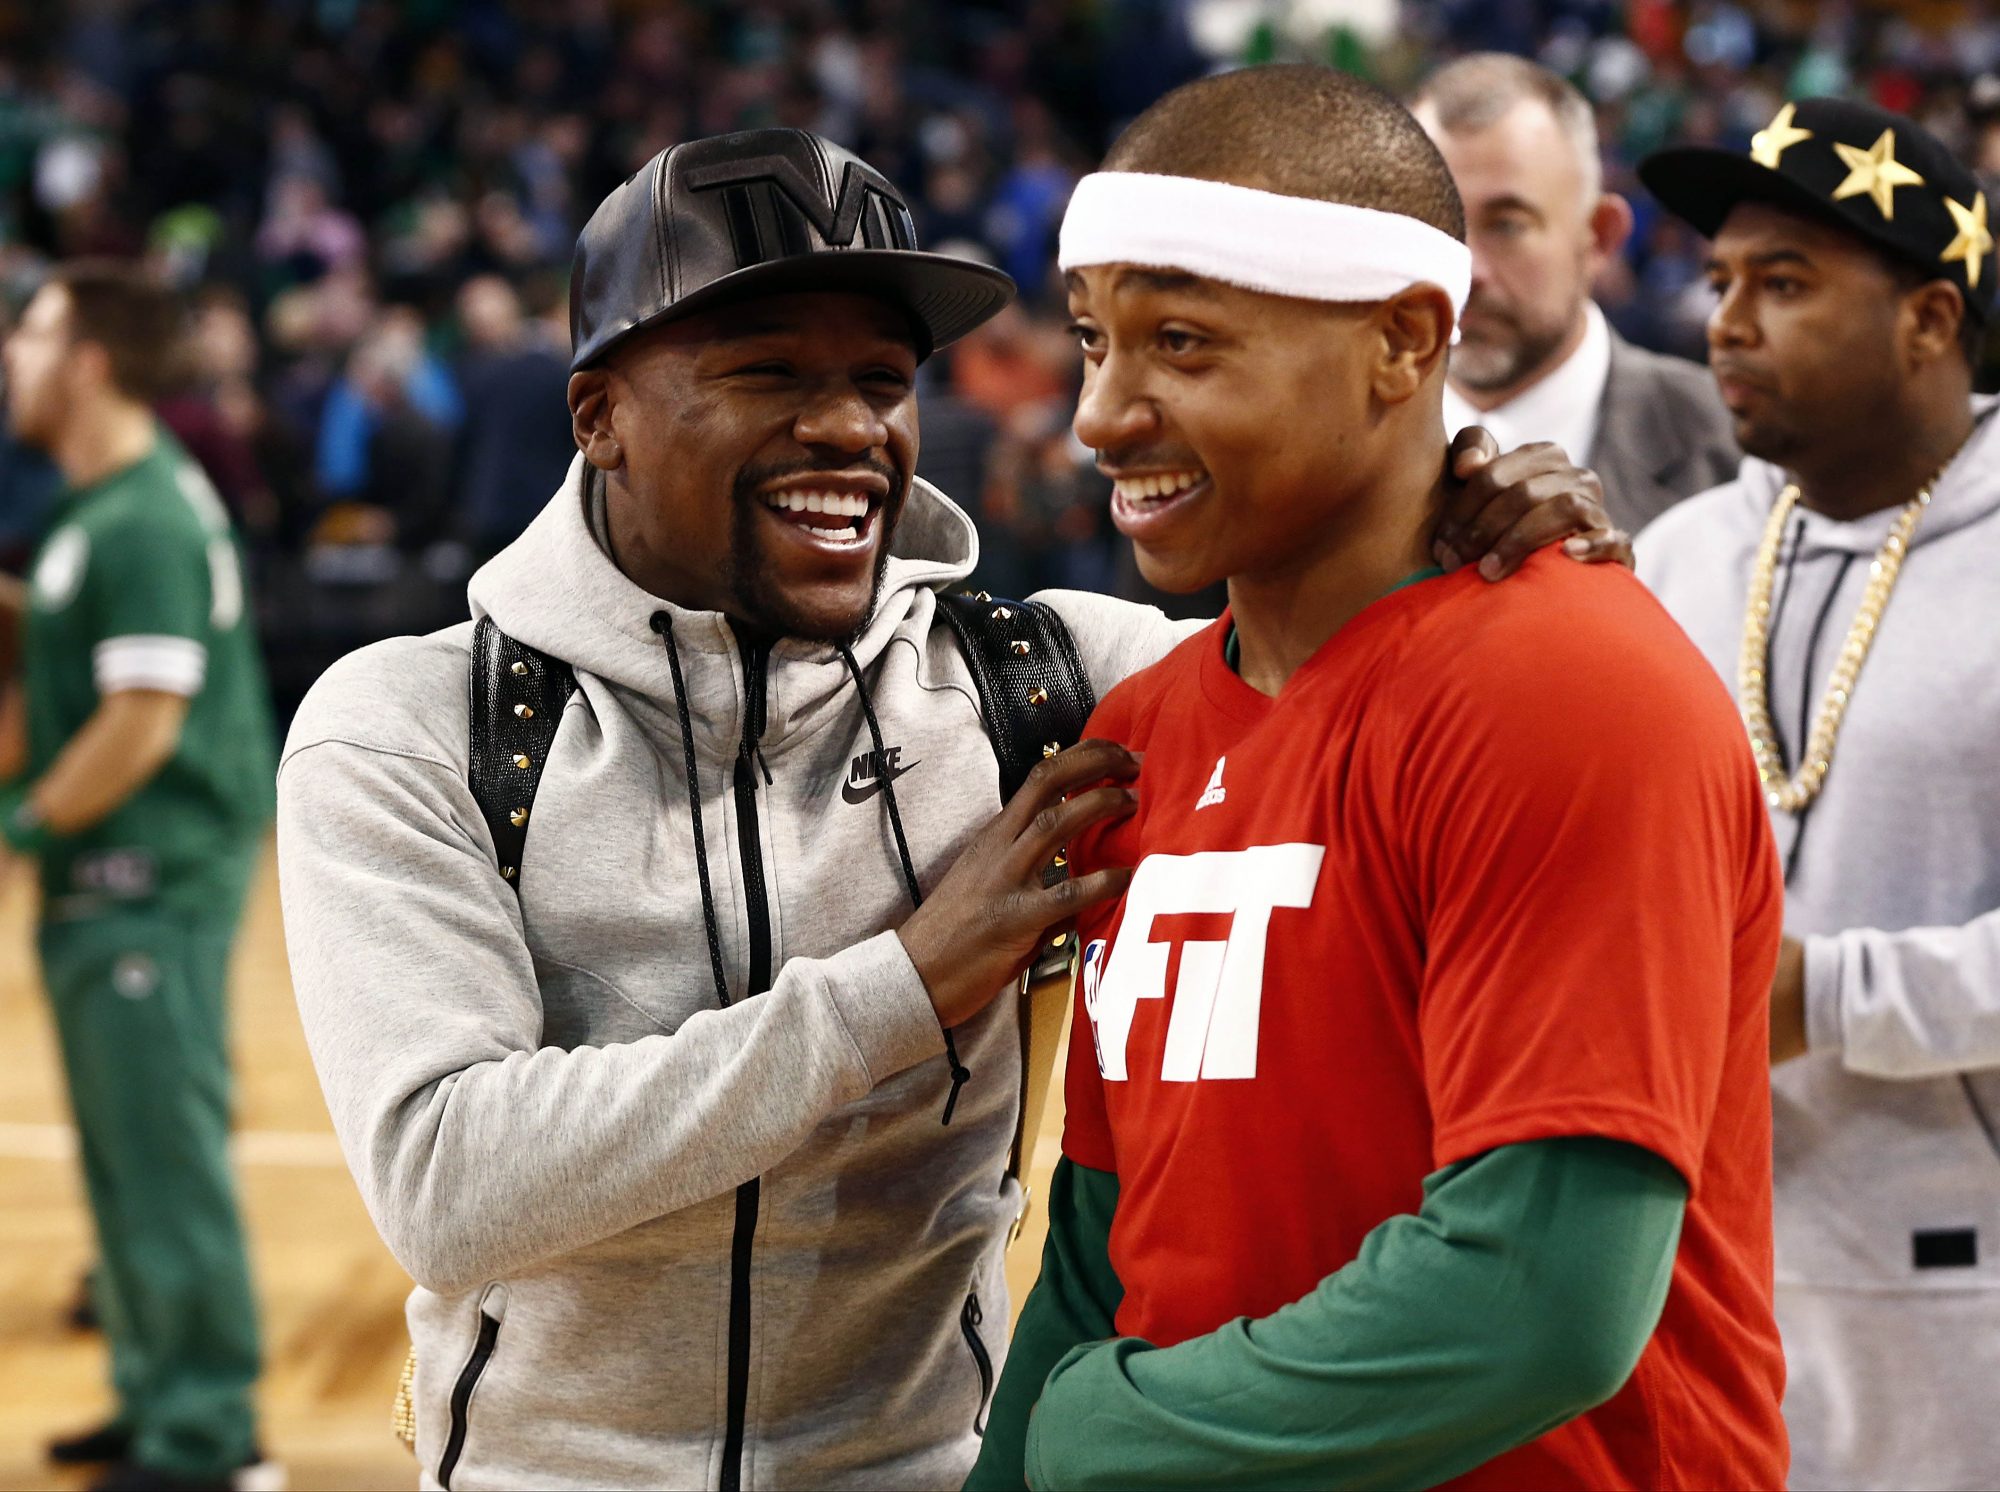 Why wasn't Floyd Mayweather at Adrien Broner's fight Saturday? 